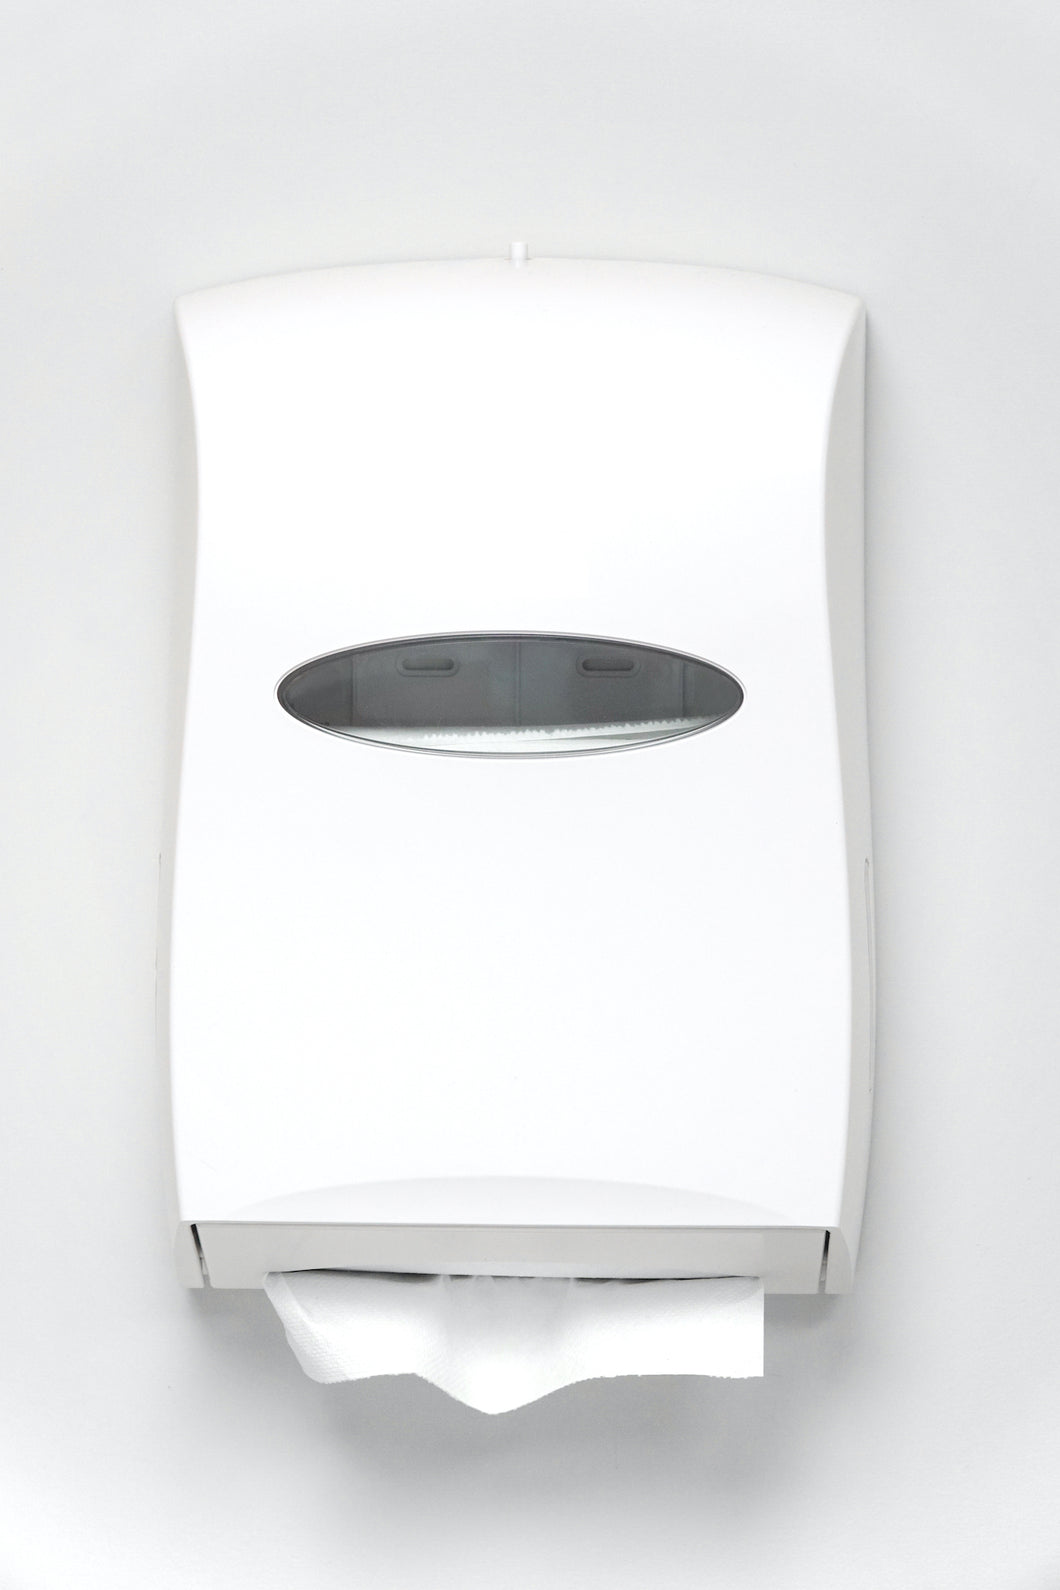 Auto Dispensers (For Paper towels)